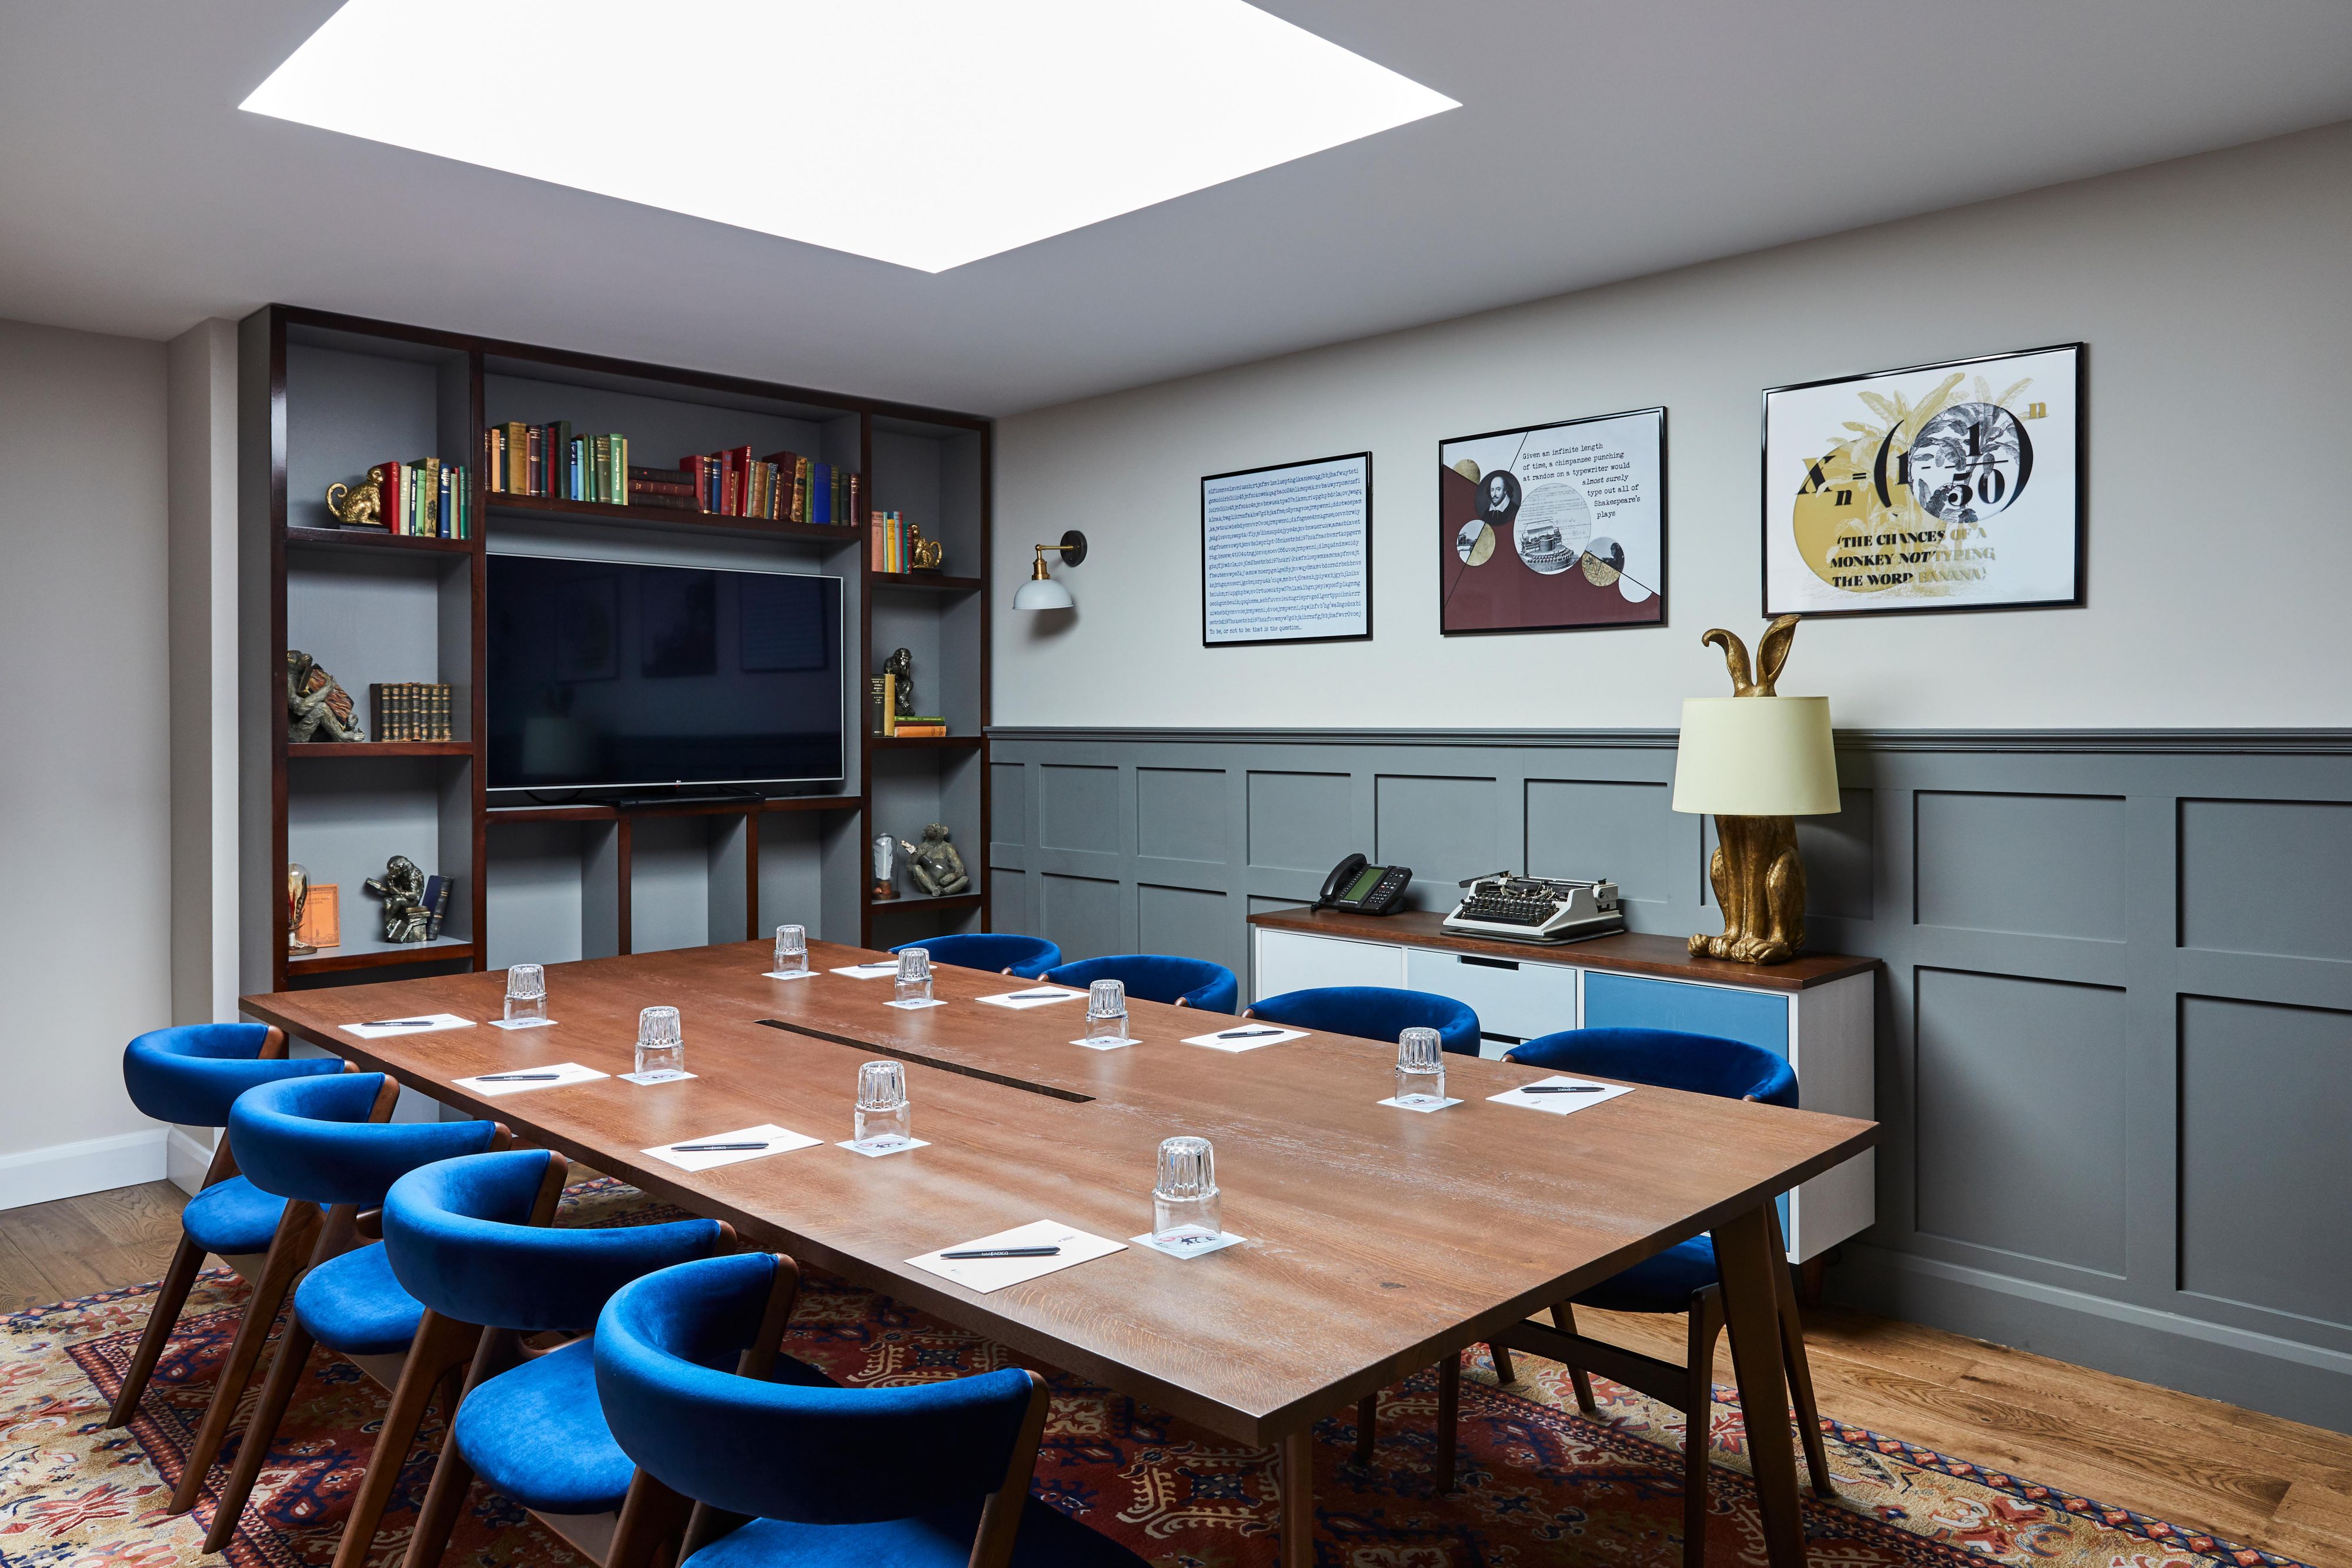 Our Executive Boardroom is perfect for small meetings for up to 12 people. With its own private entrance, all mod cons and plenty of natural daylight. A bespoke meeting space in the heart of Stratford Upon Avon, plus, earn IHG Business Rewards each time you book.